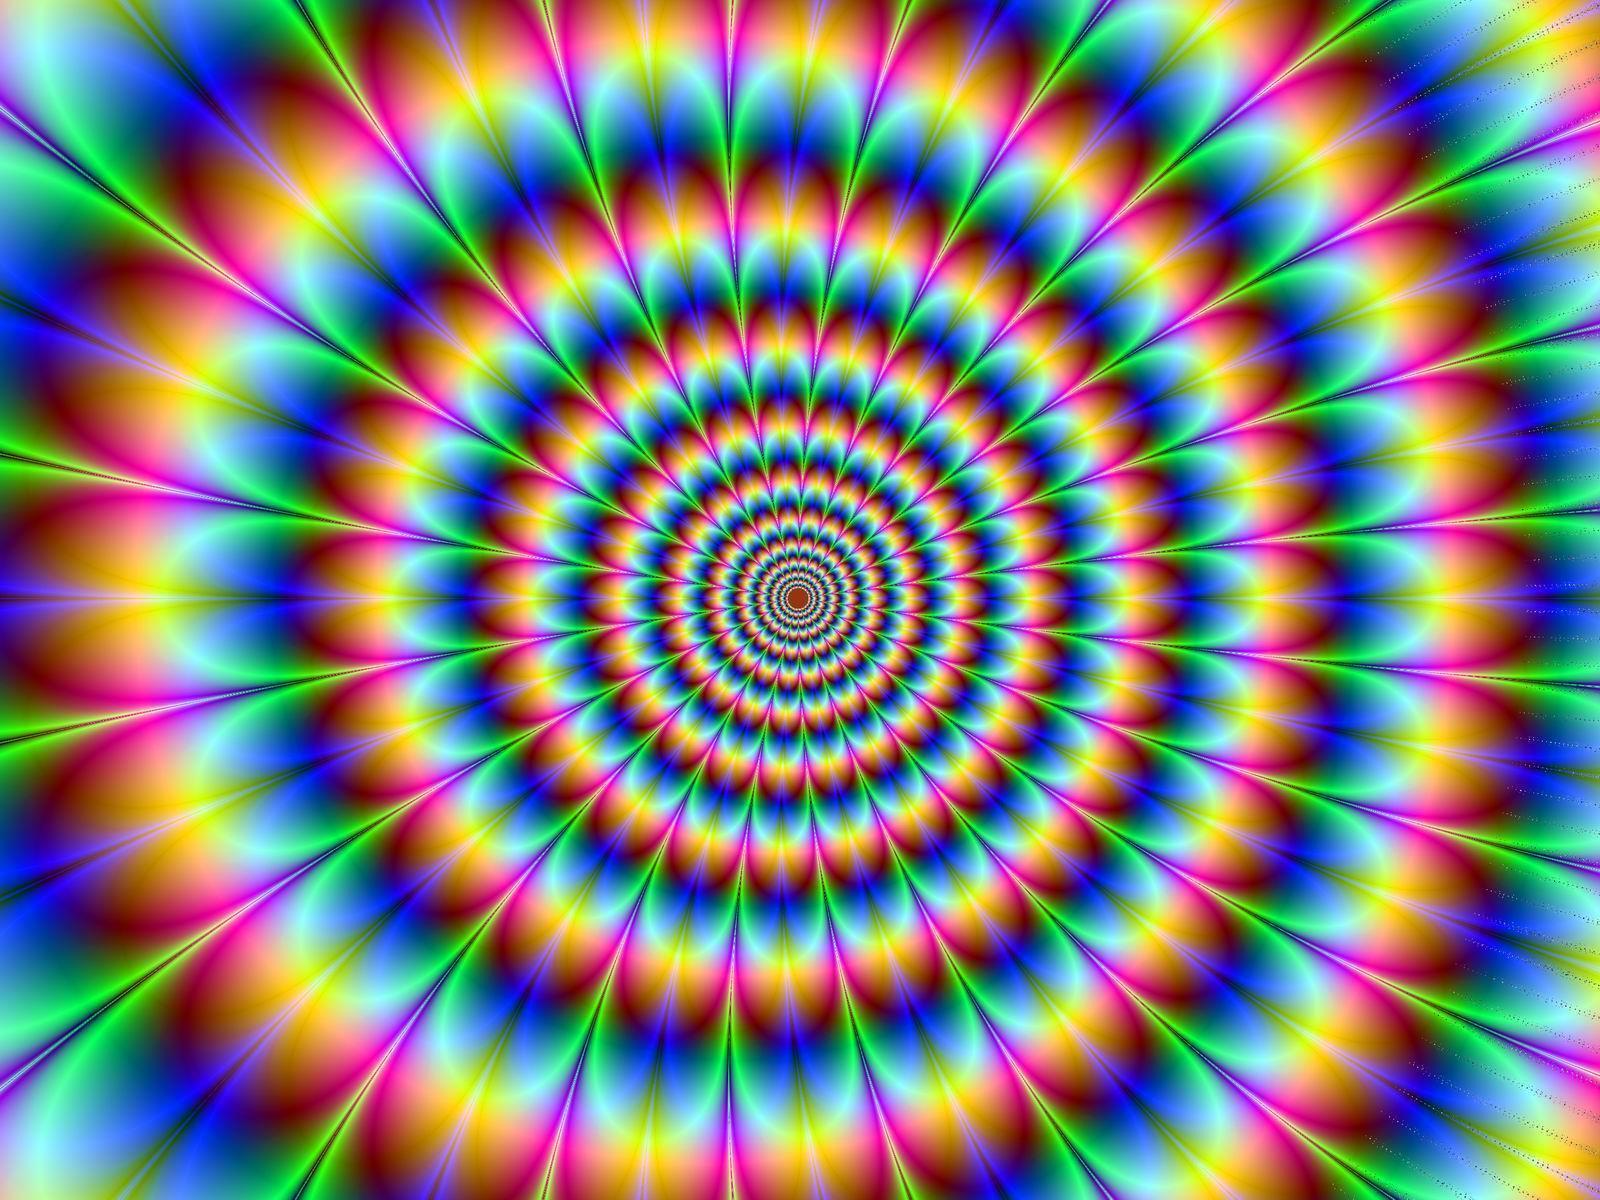 Download Psychedelic 2 Wallpaper 1920x1080 #